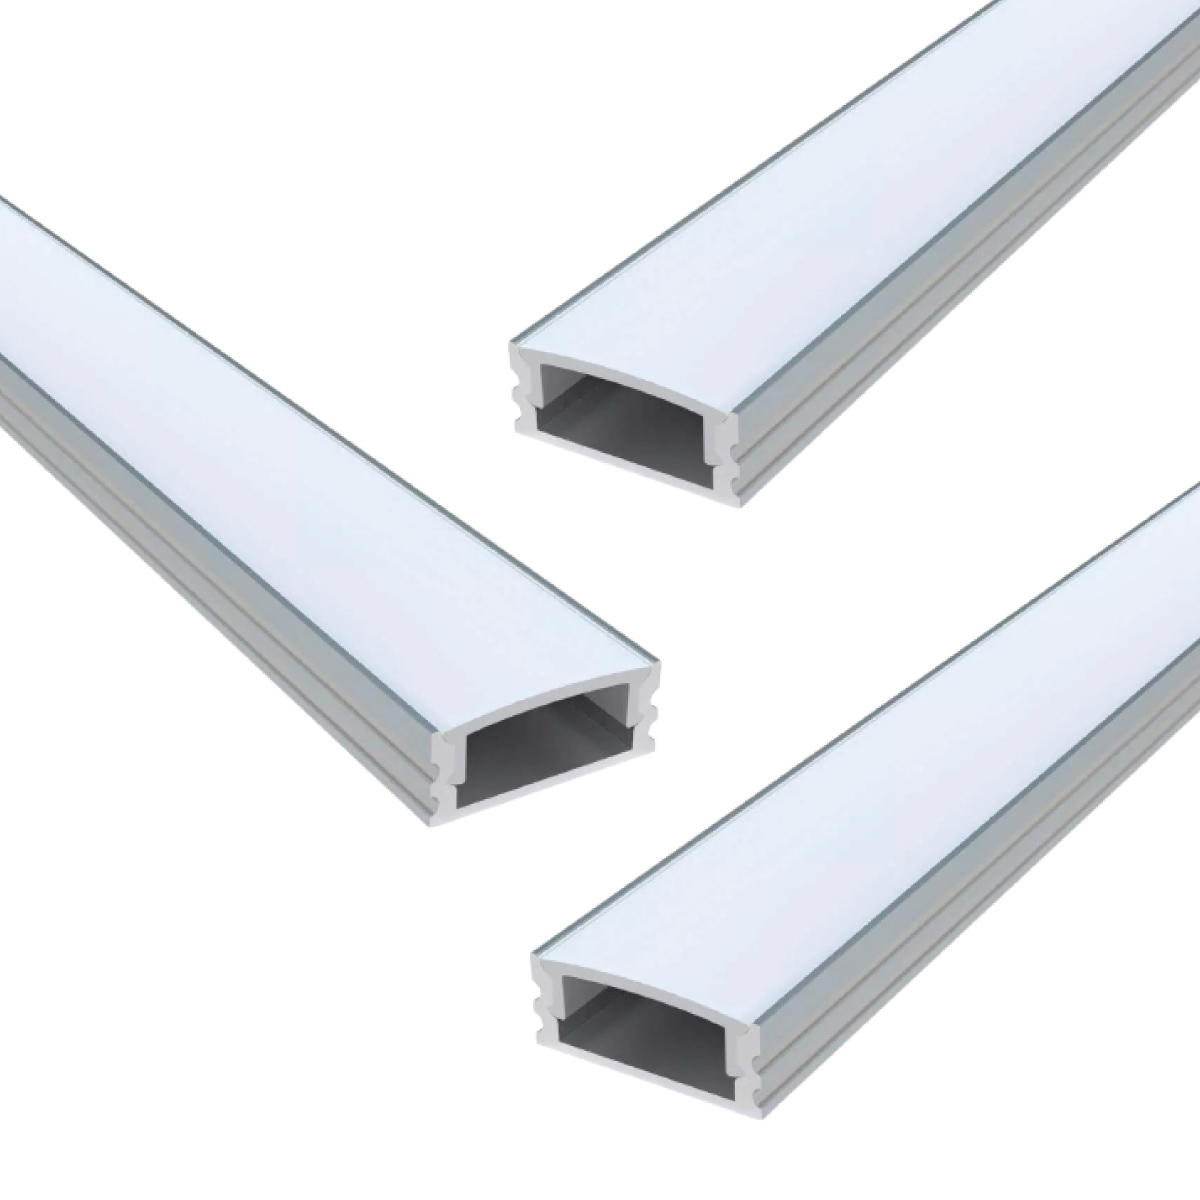 View Pack of 3 Shallow 7mm Surface Mounted LED Aluminium Profiles 2m information